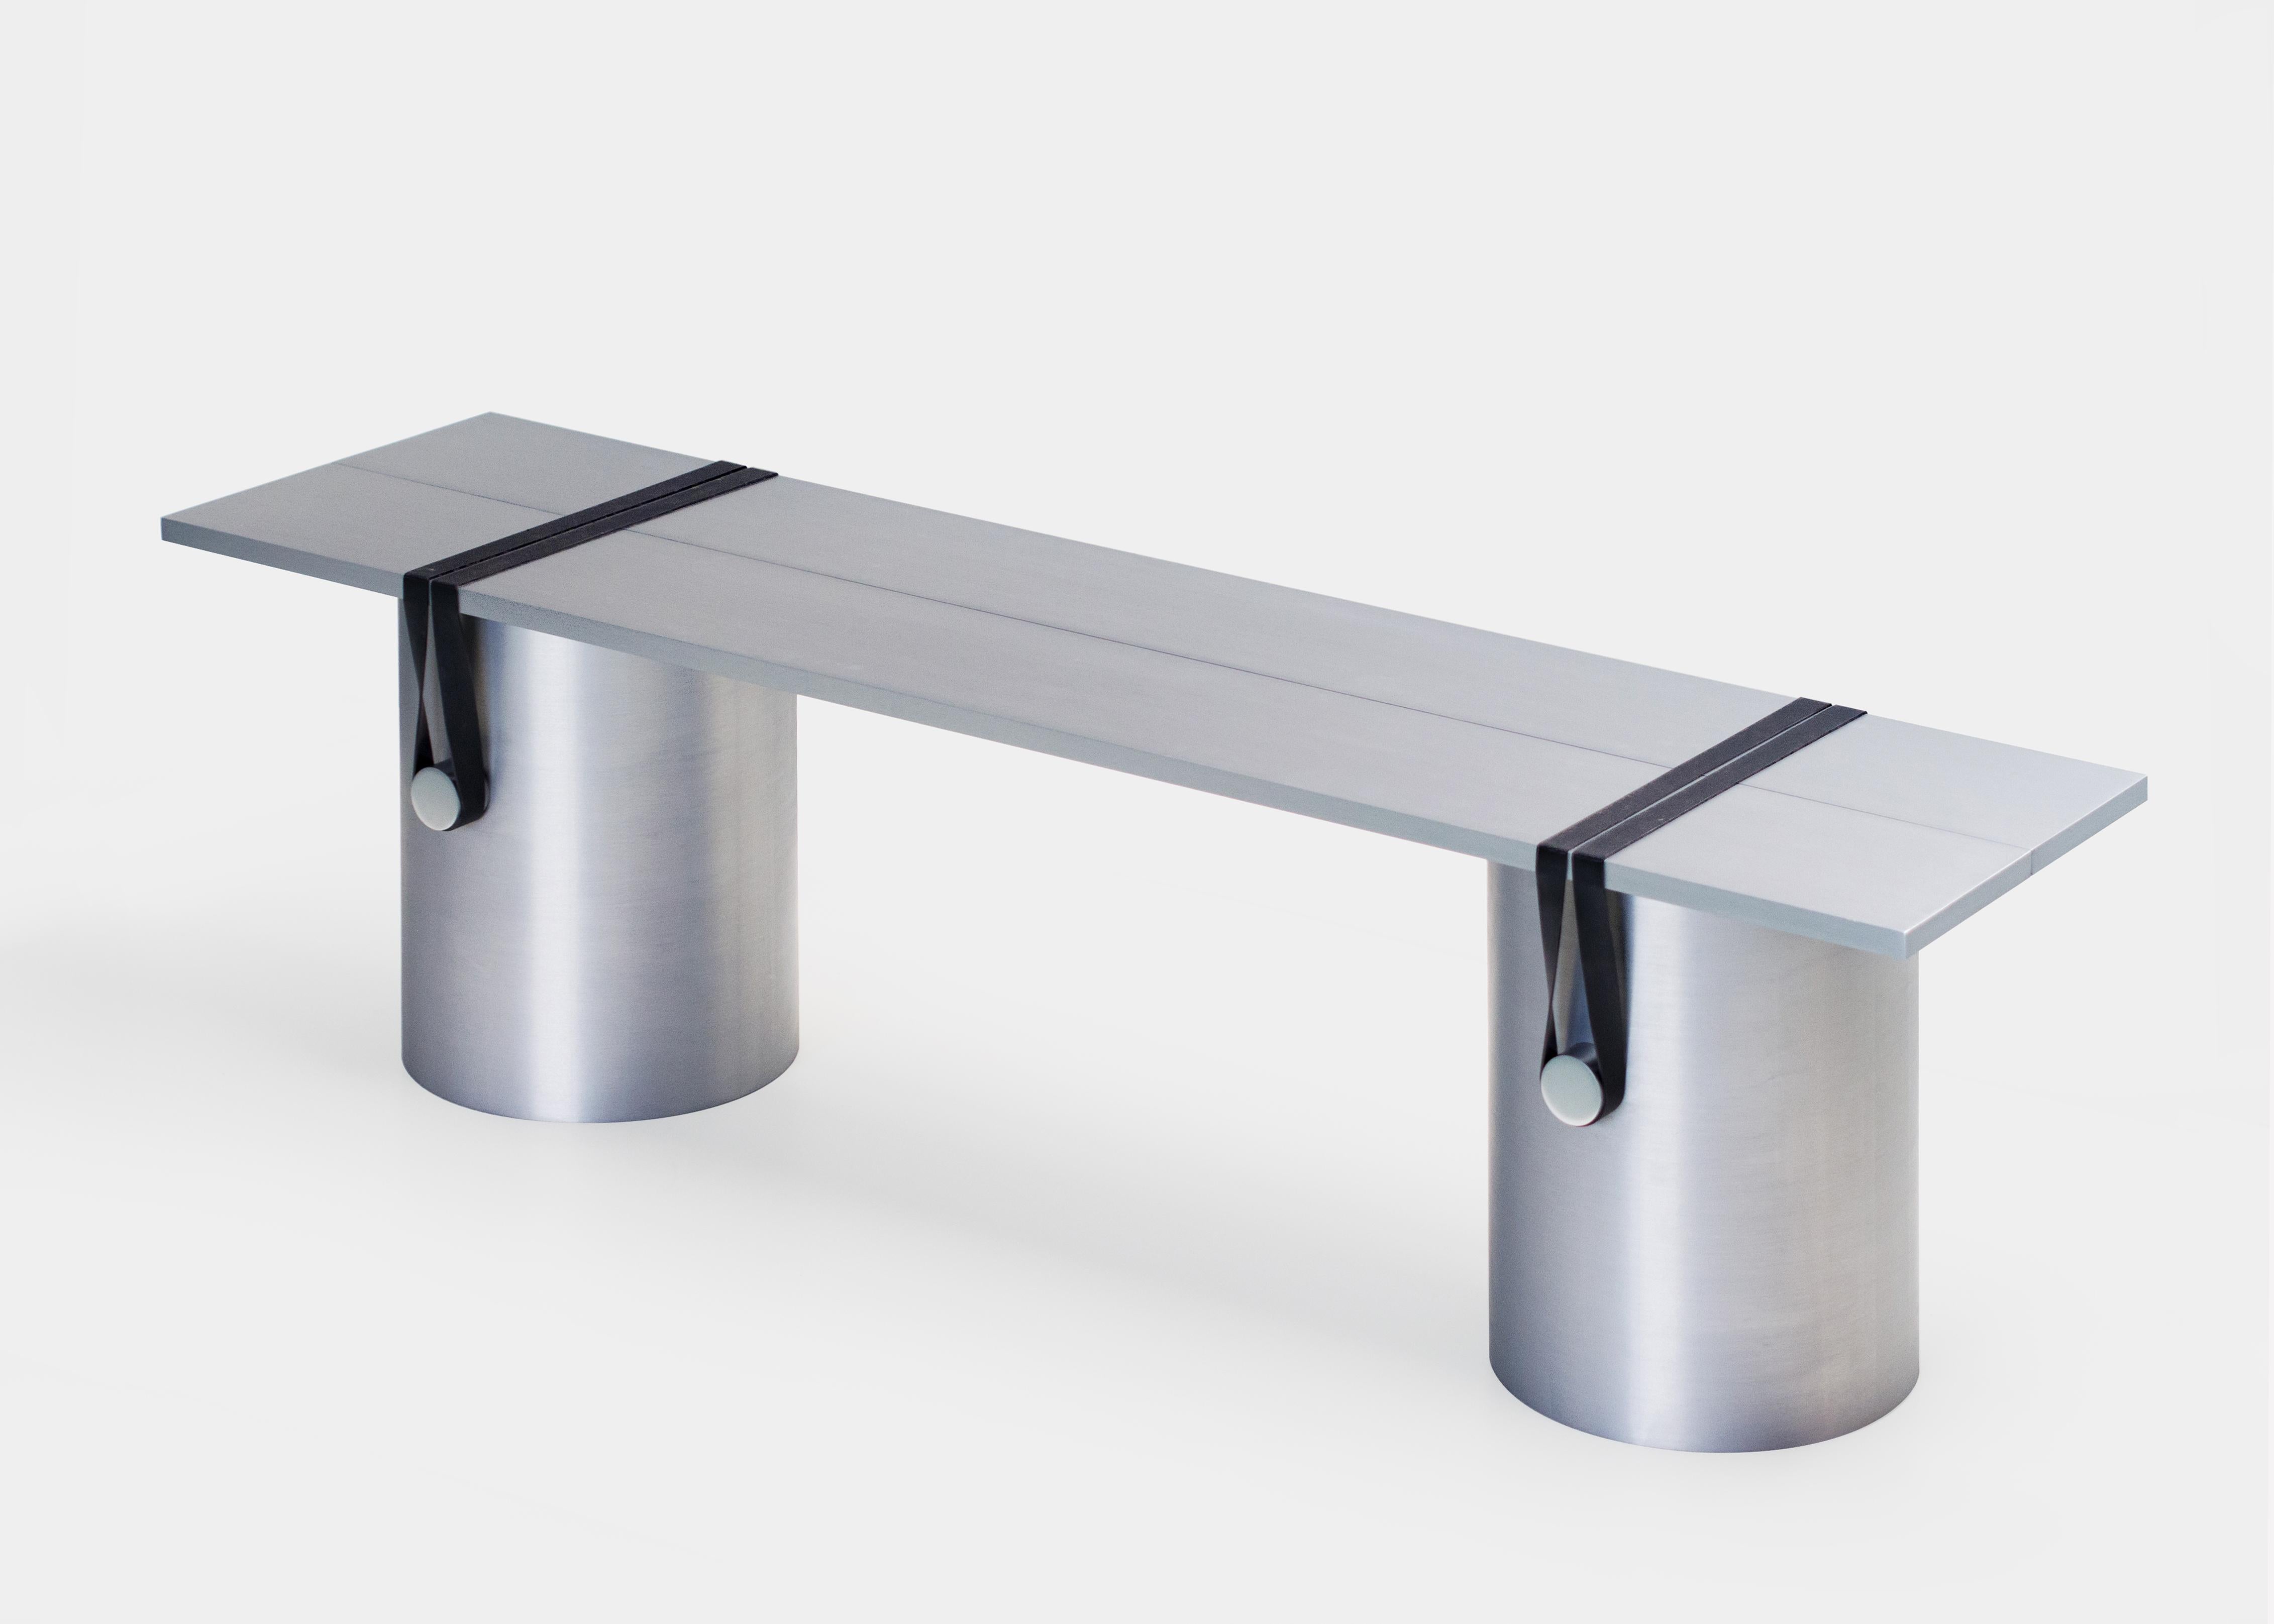 Aluminum Contemporary Side Table/Bench by Johan Viladrich